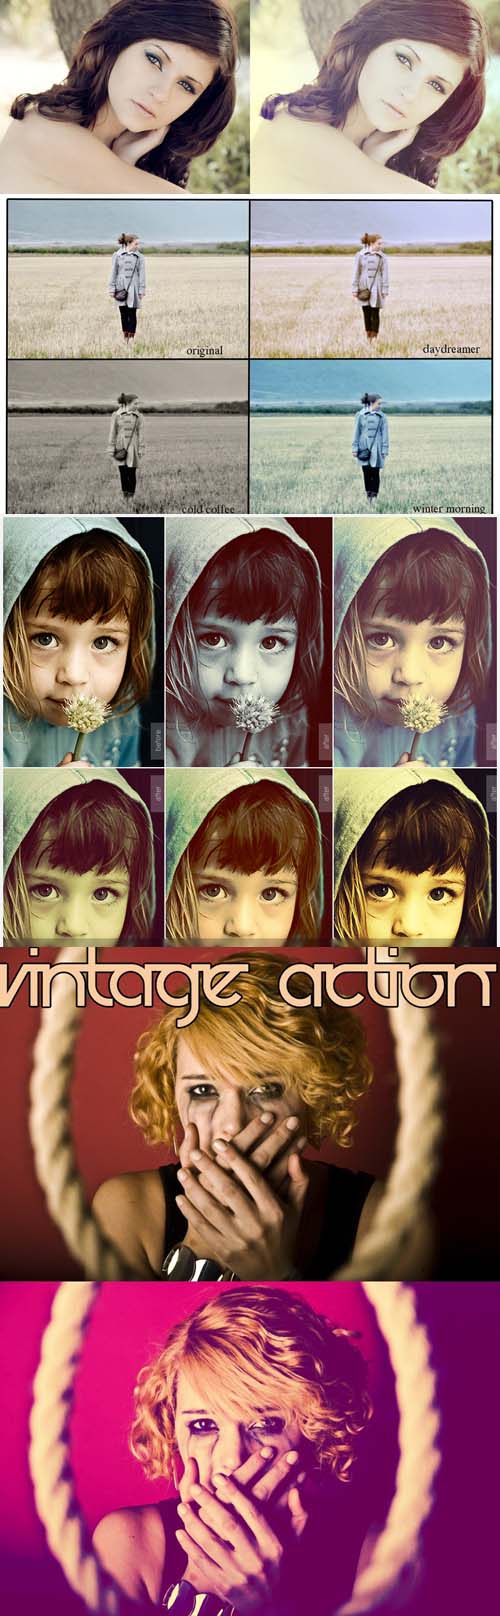 Cool Photoshop Action 2012 pack 391